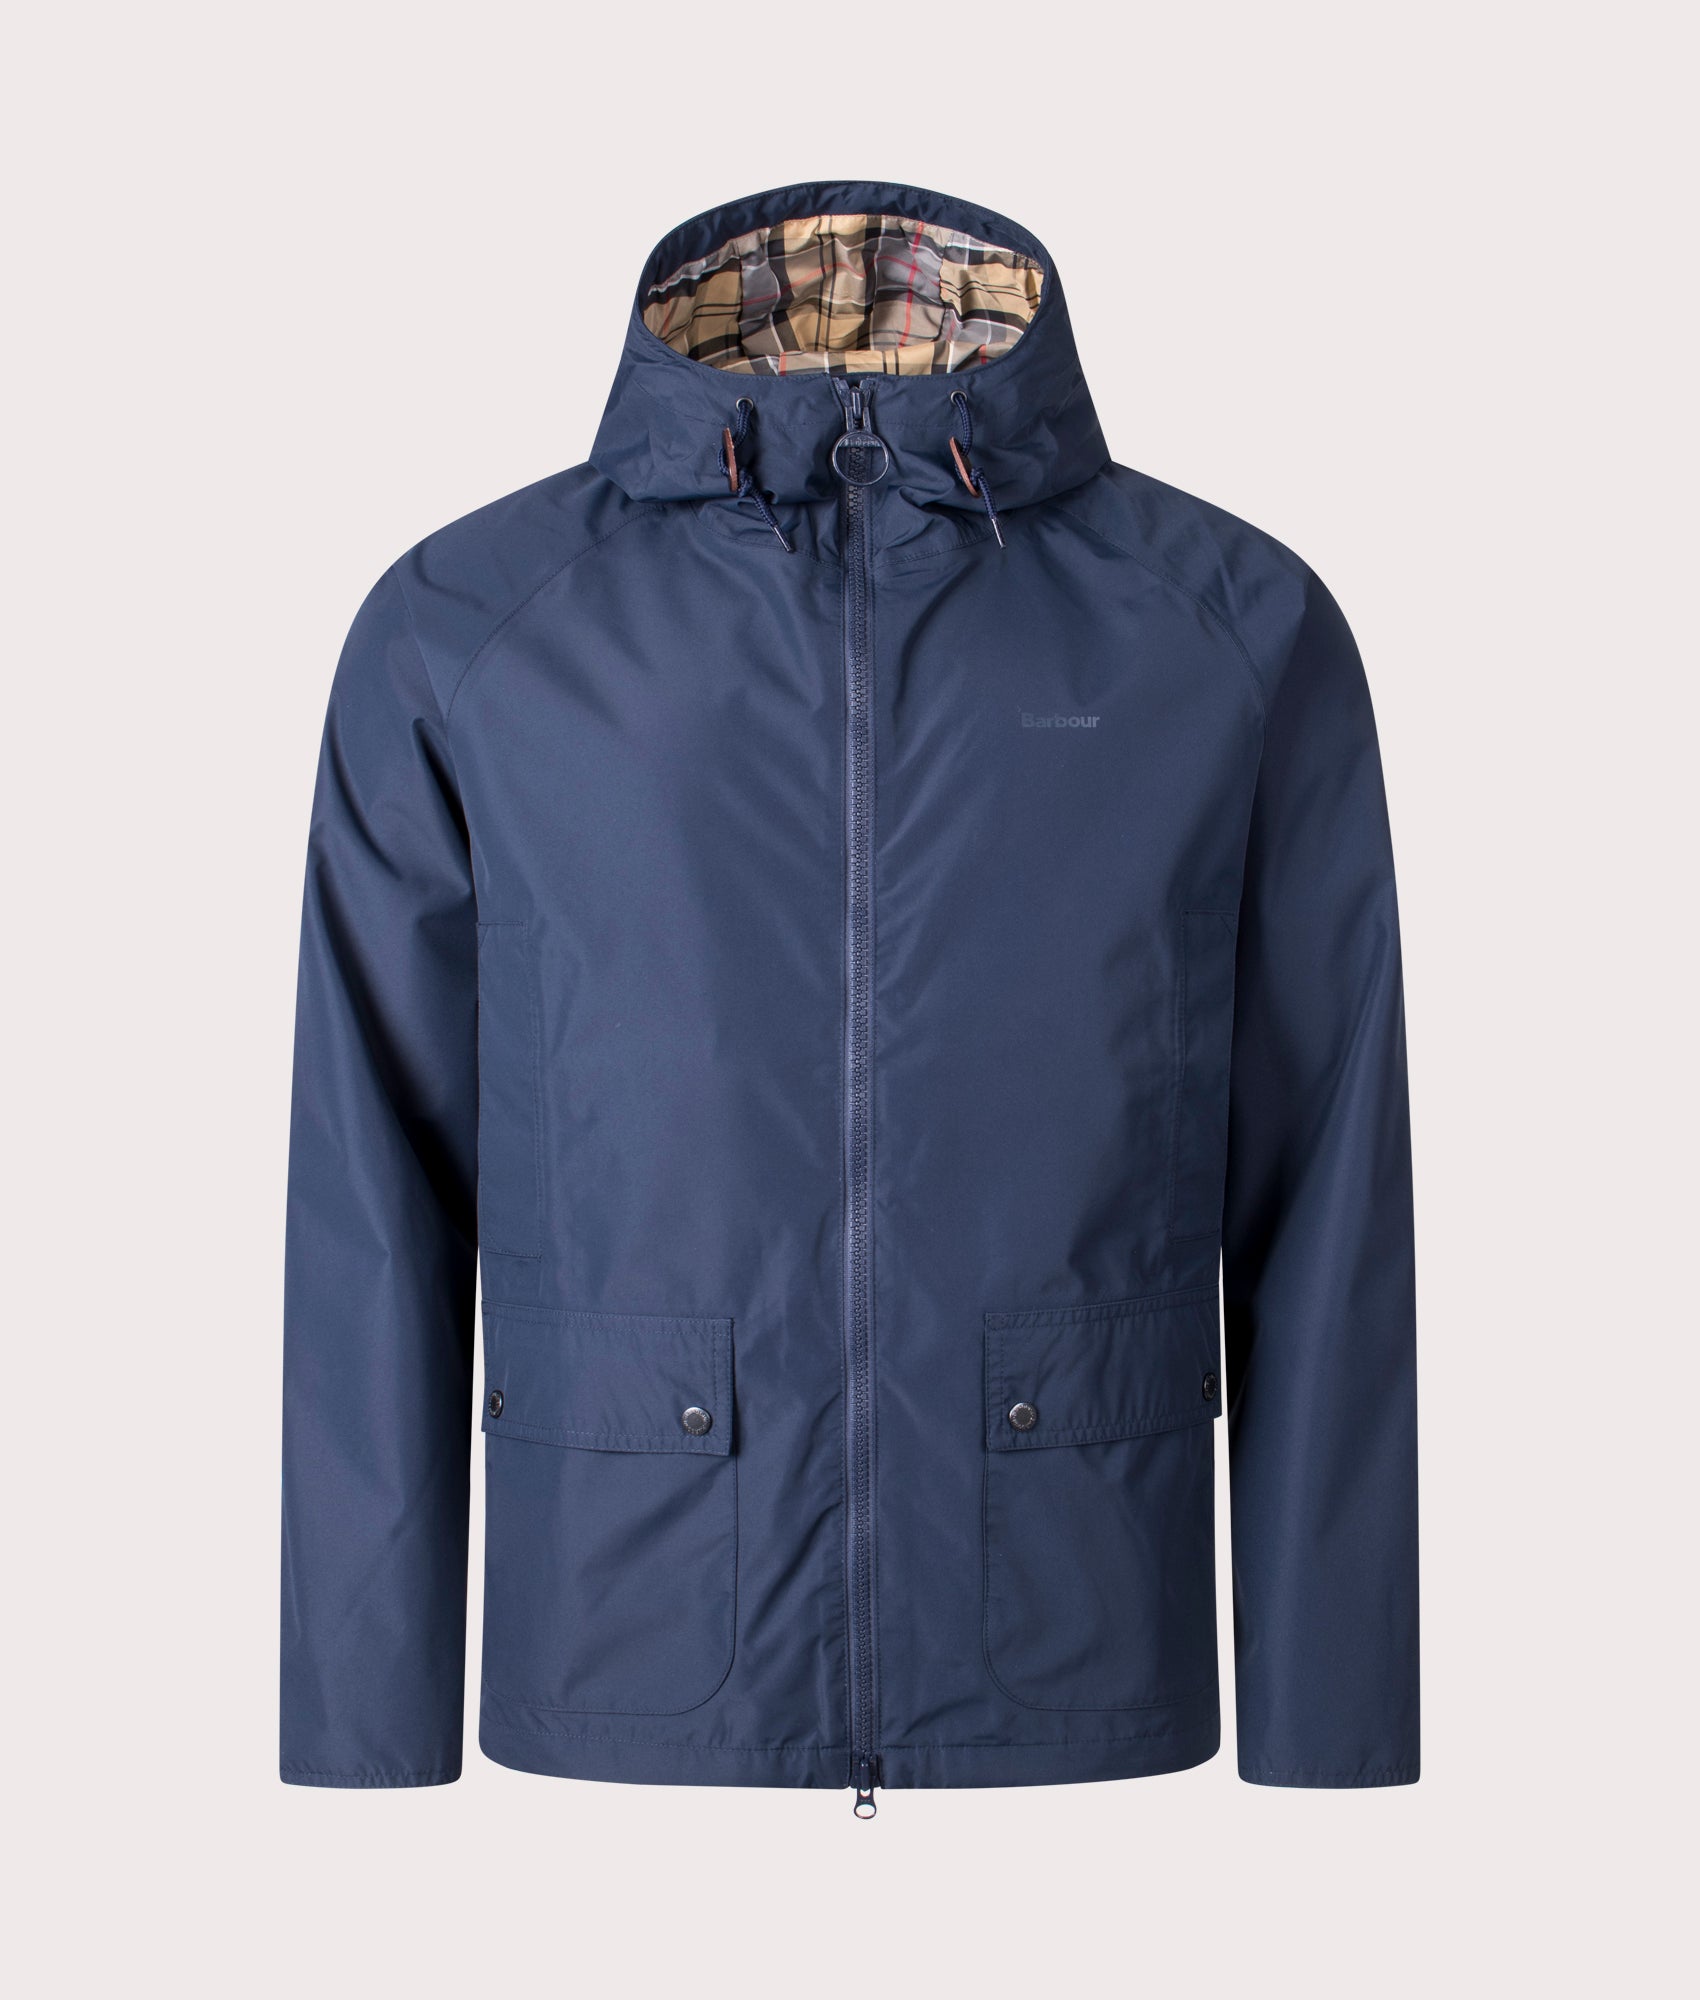 Barbour Lifestyle Mens Hooded Domus Jacket - Colour: NY73 Navy/Dress - Size: XL